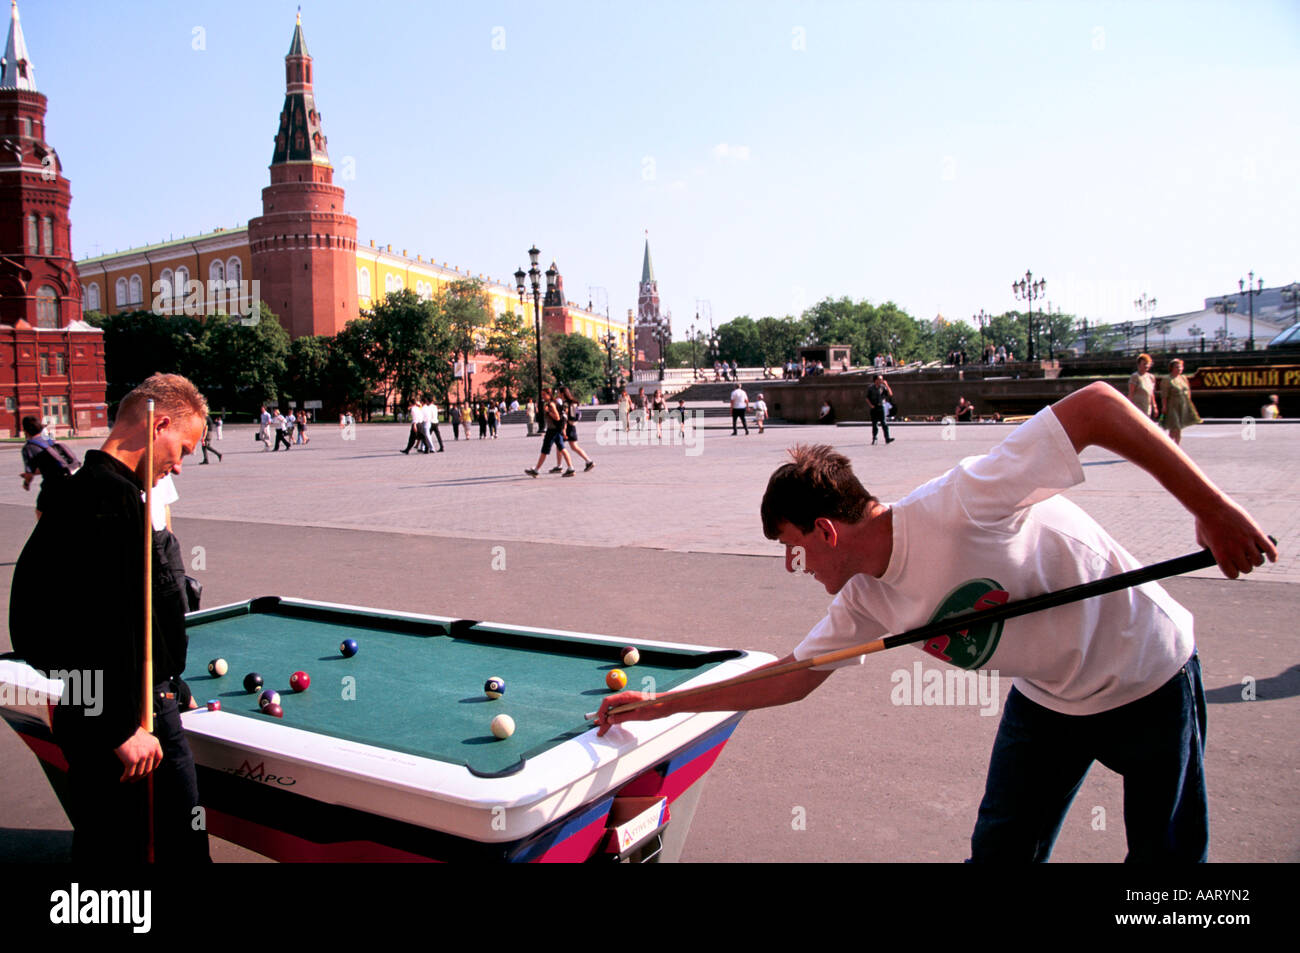 ST PETERSBURG MOSCOW DURING AN OPPRESSIVE HEATWAVE MUSCOVITES PLAY POOL OPPOSITE THE KREMLIN MOSCOW 1998 Stock Photo